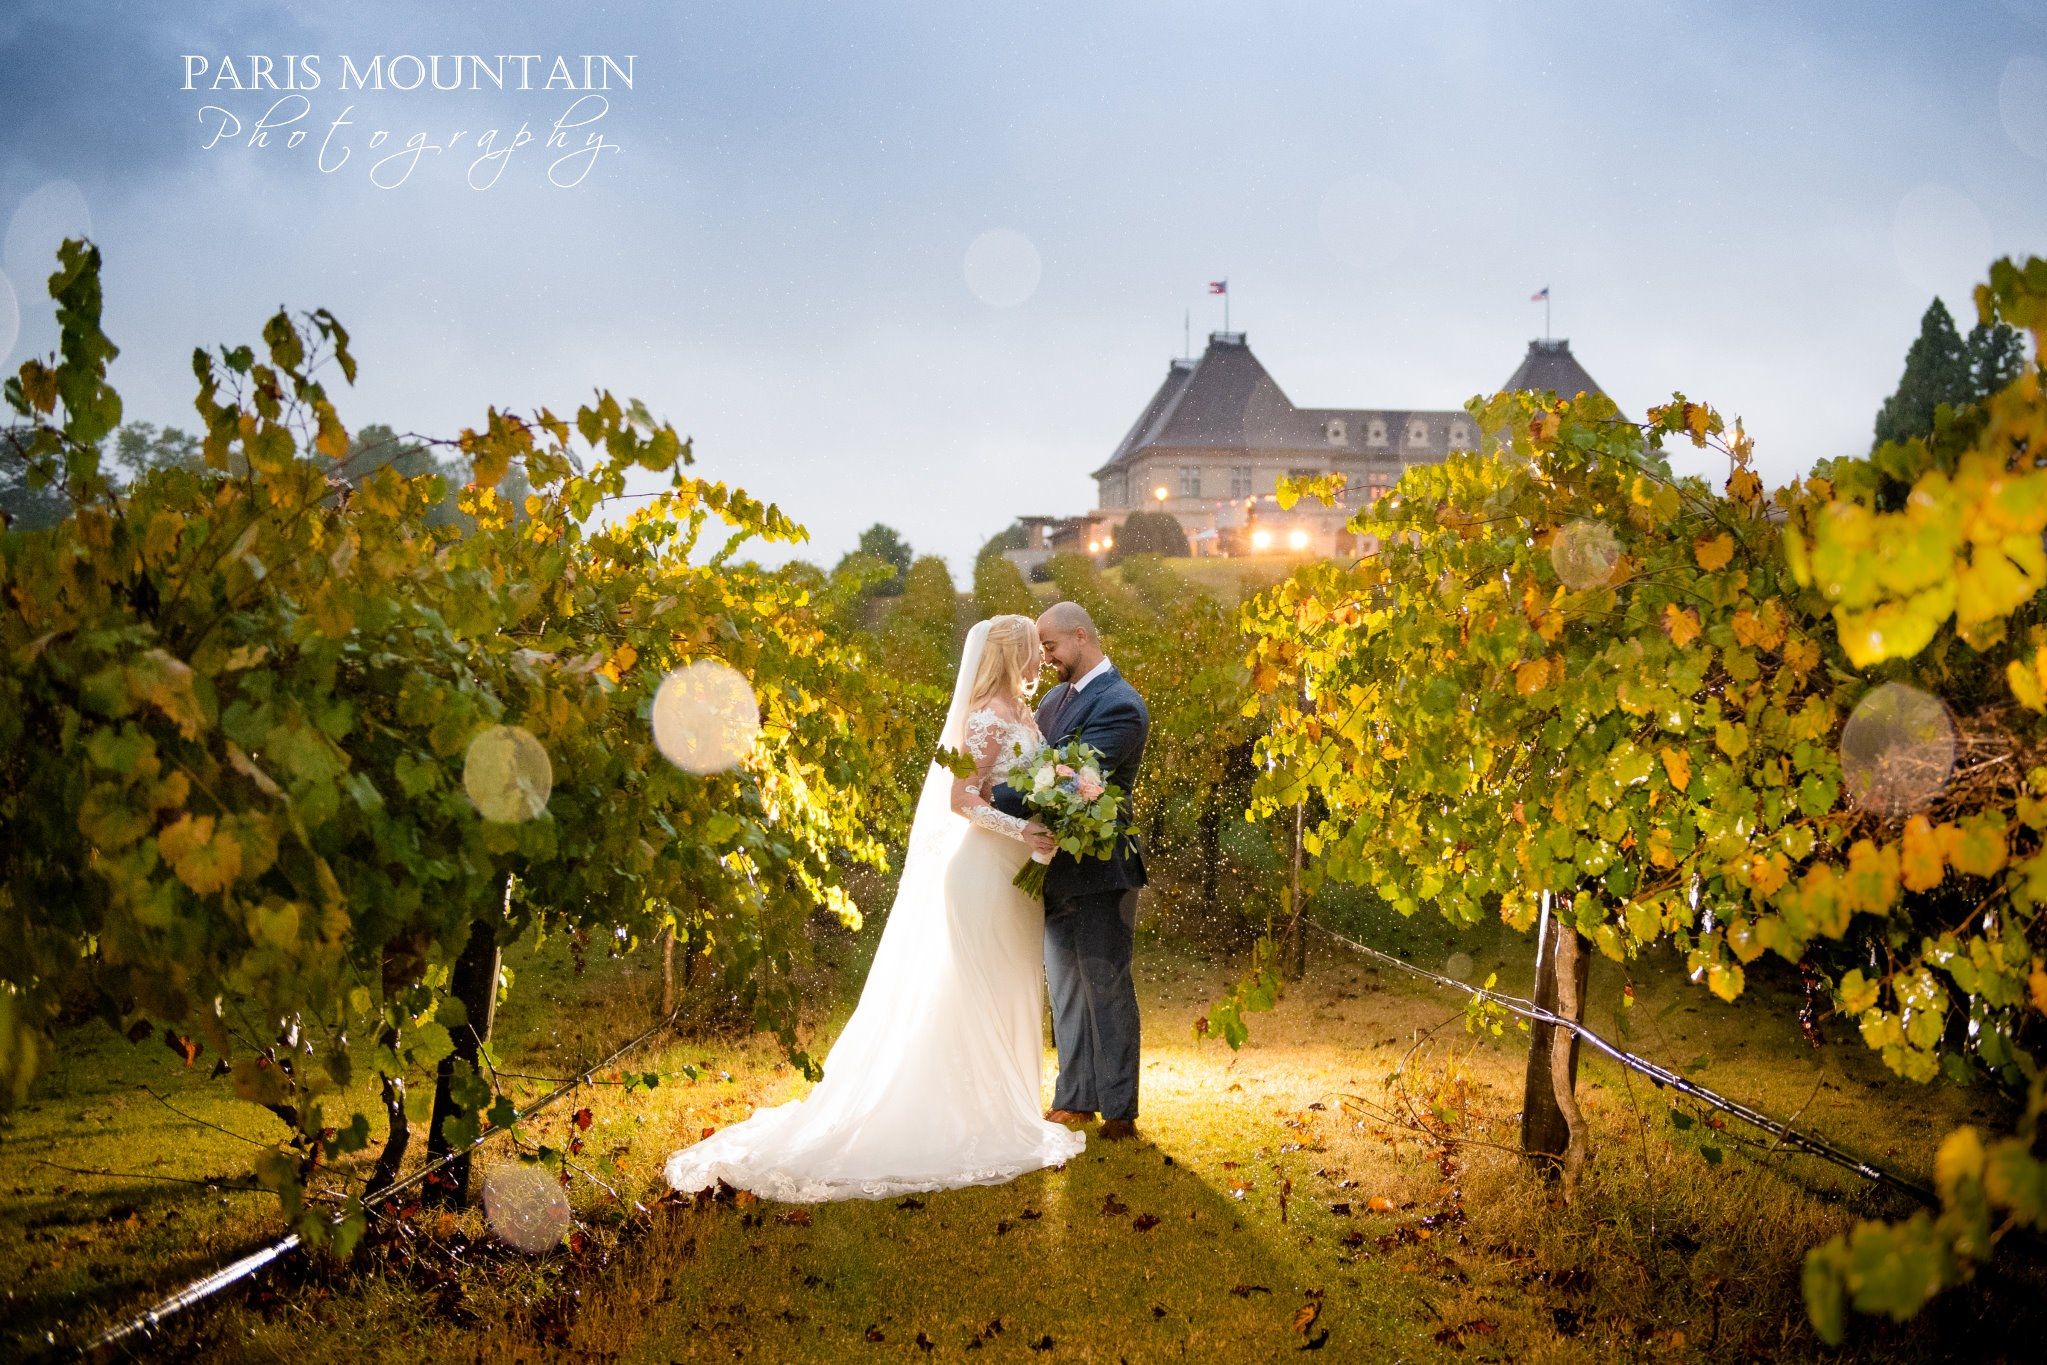 Image for post: Paris Mountain Photography 2019 Weddings